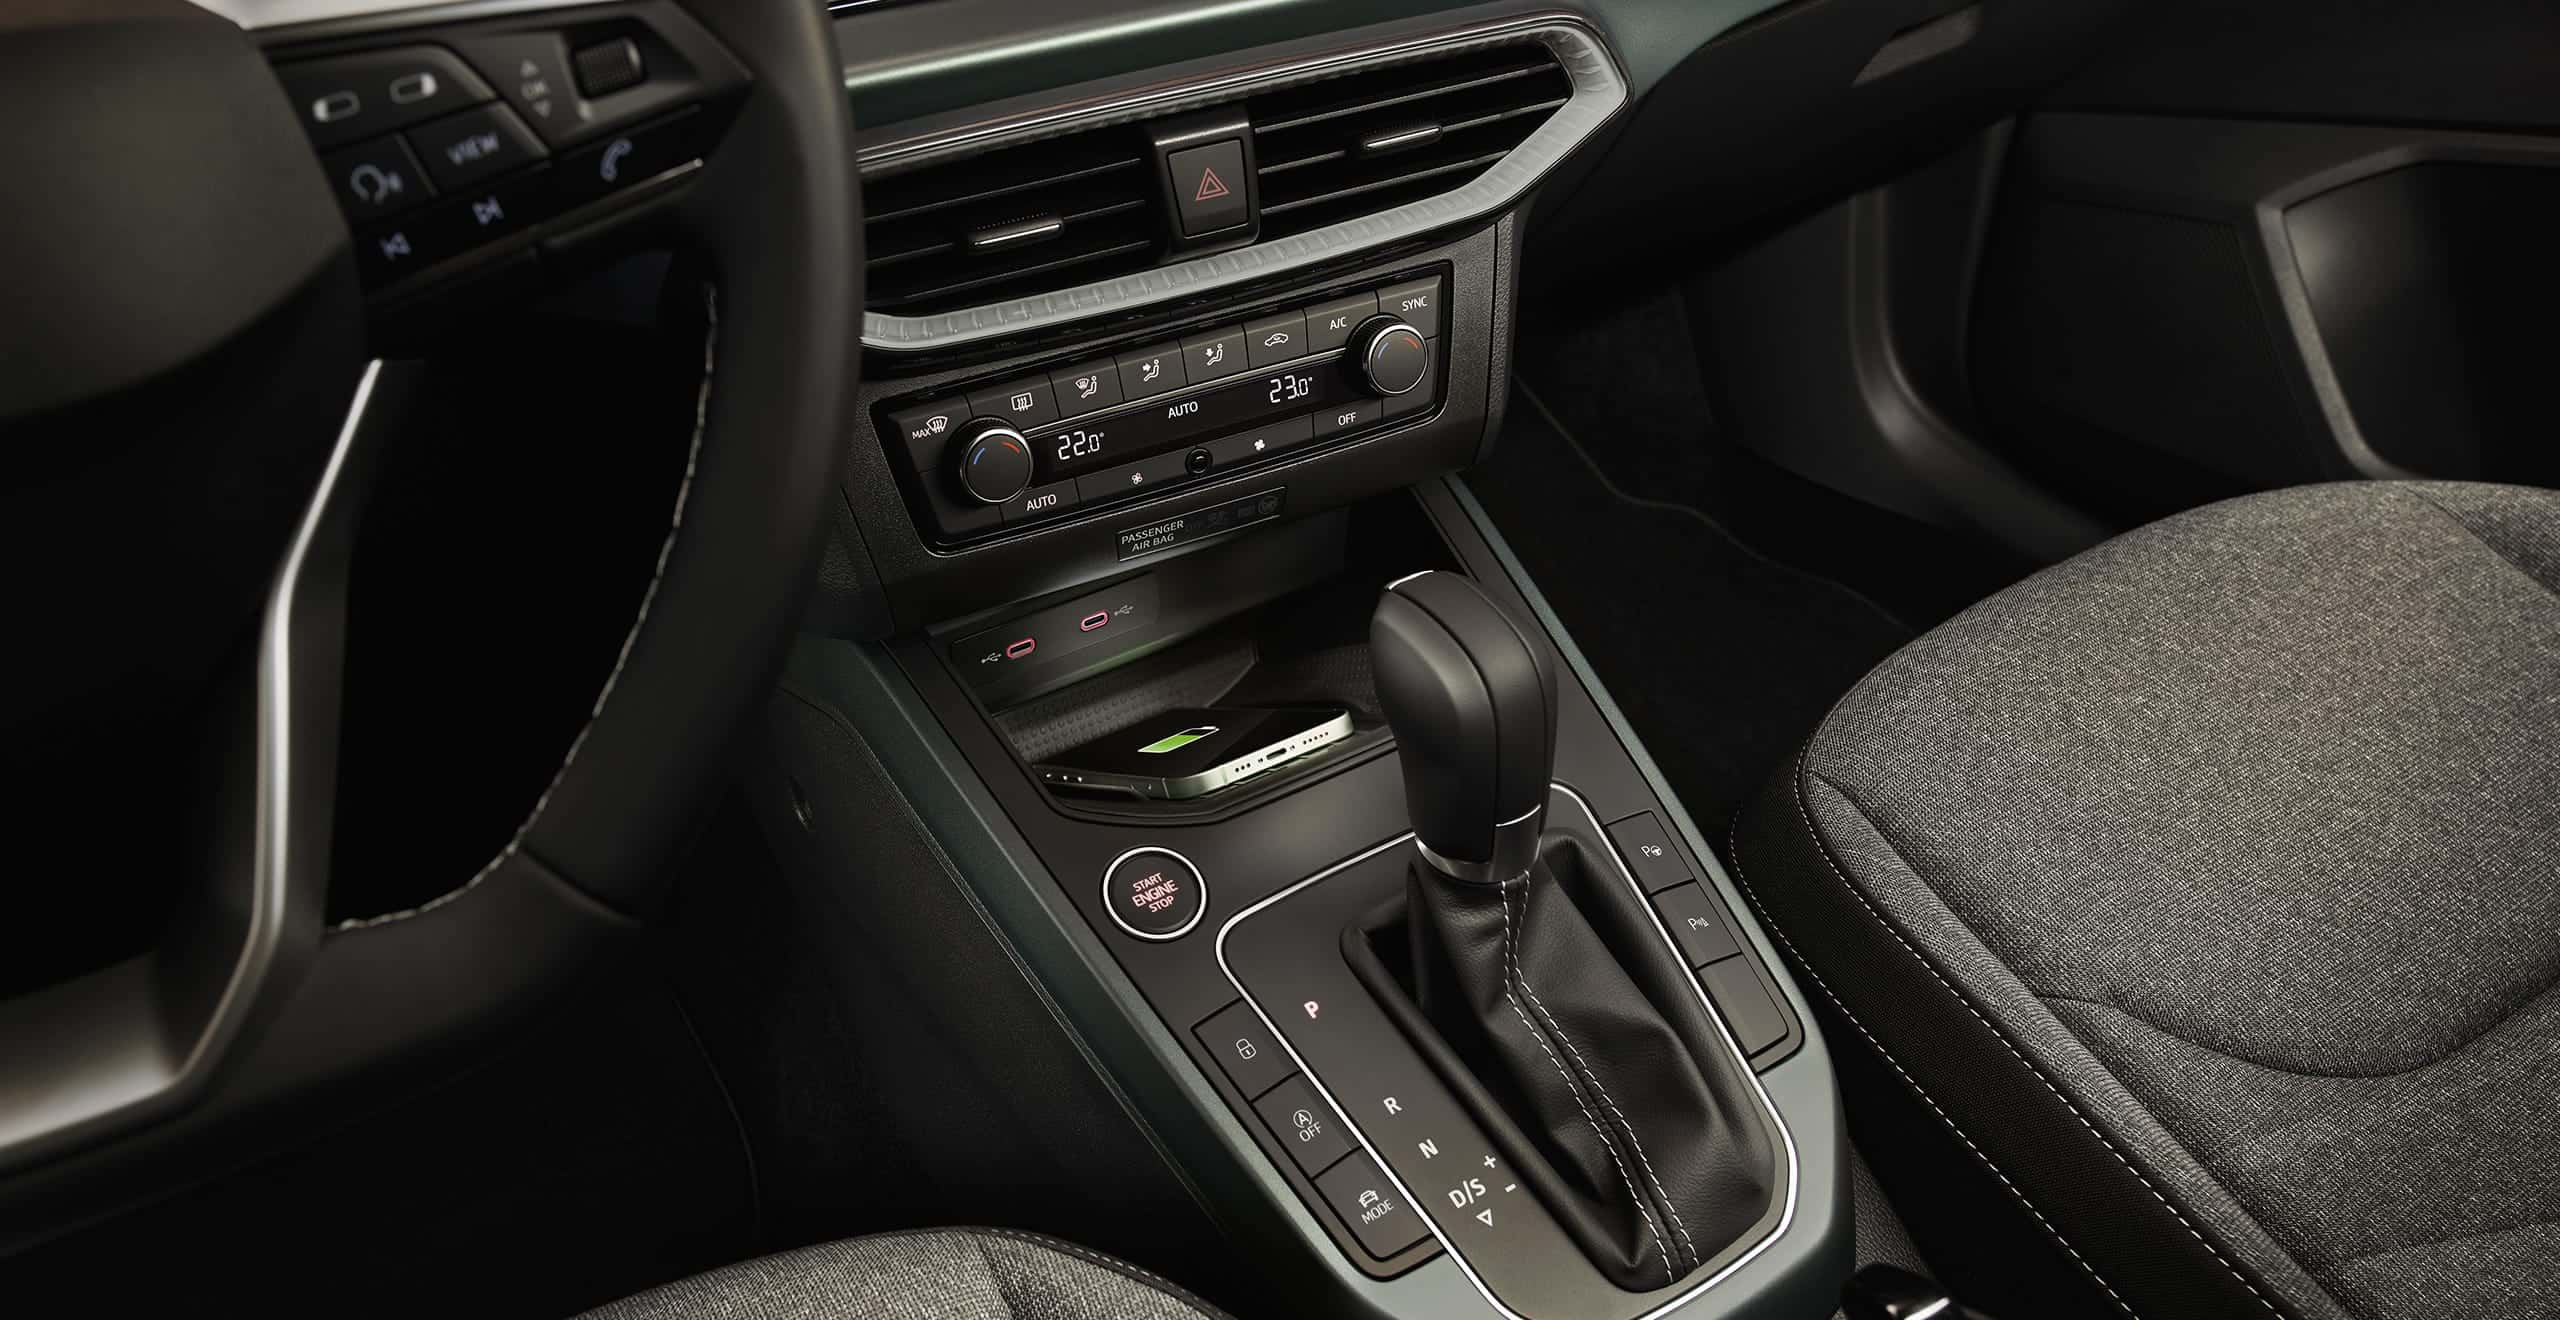 SEAT Arona interior view with smartphone connected to the infotainment screen  